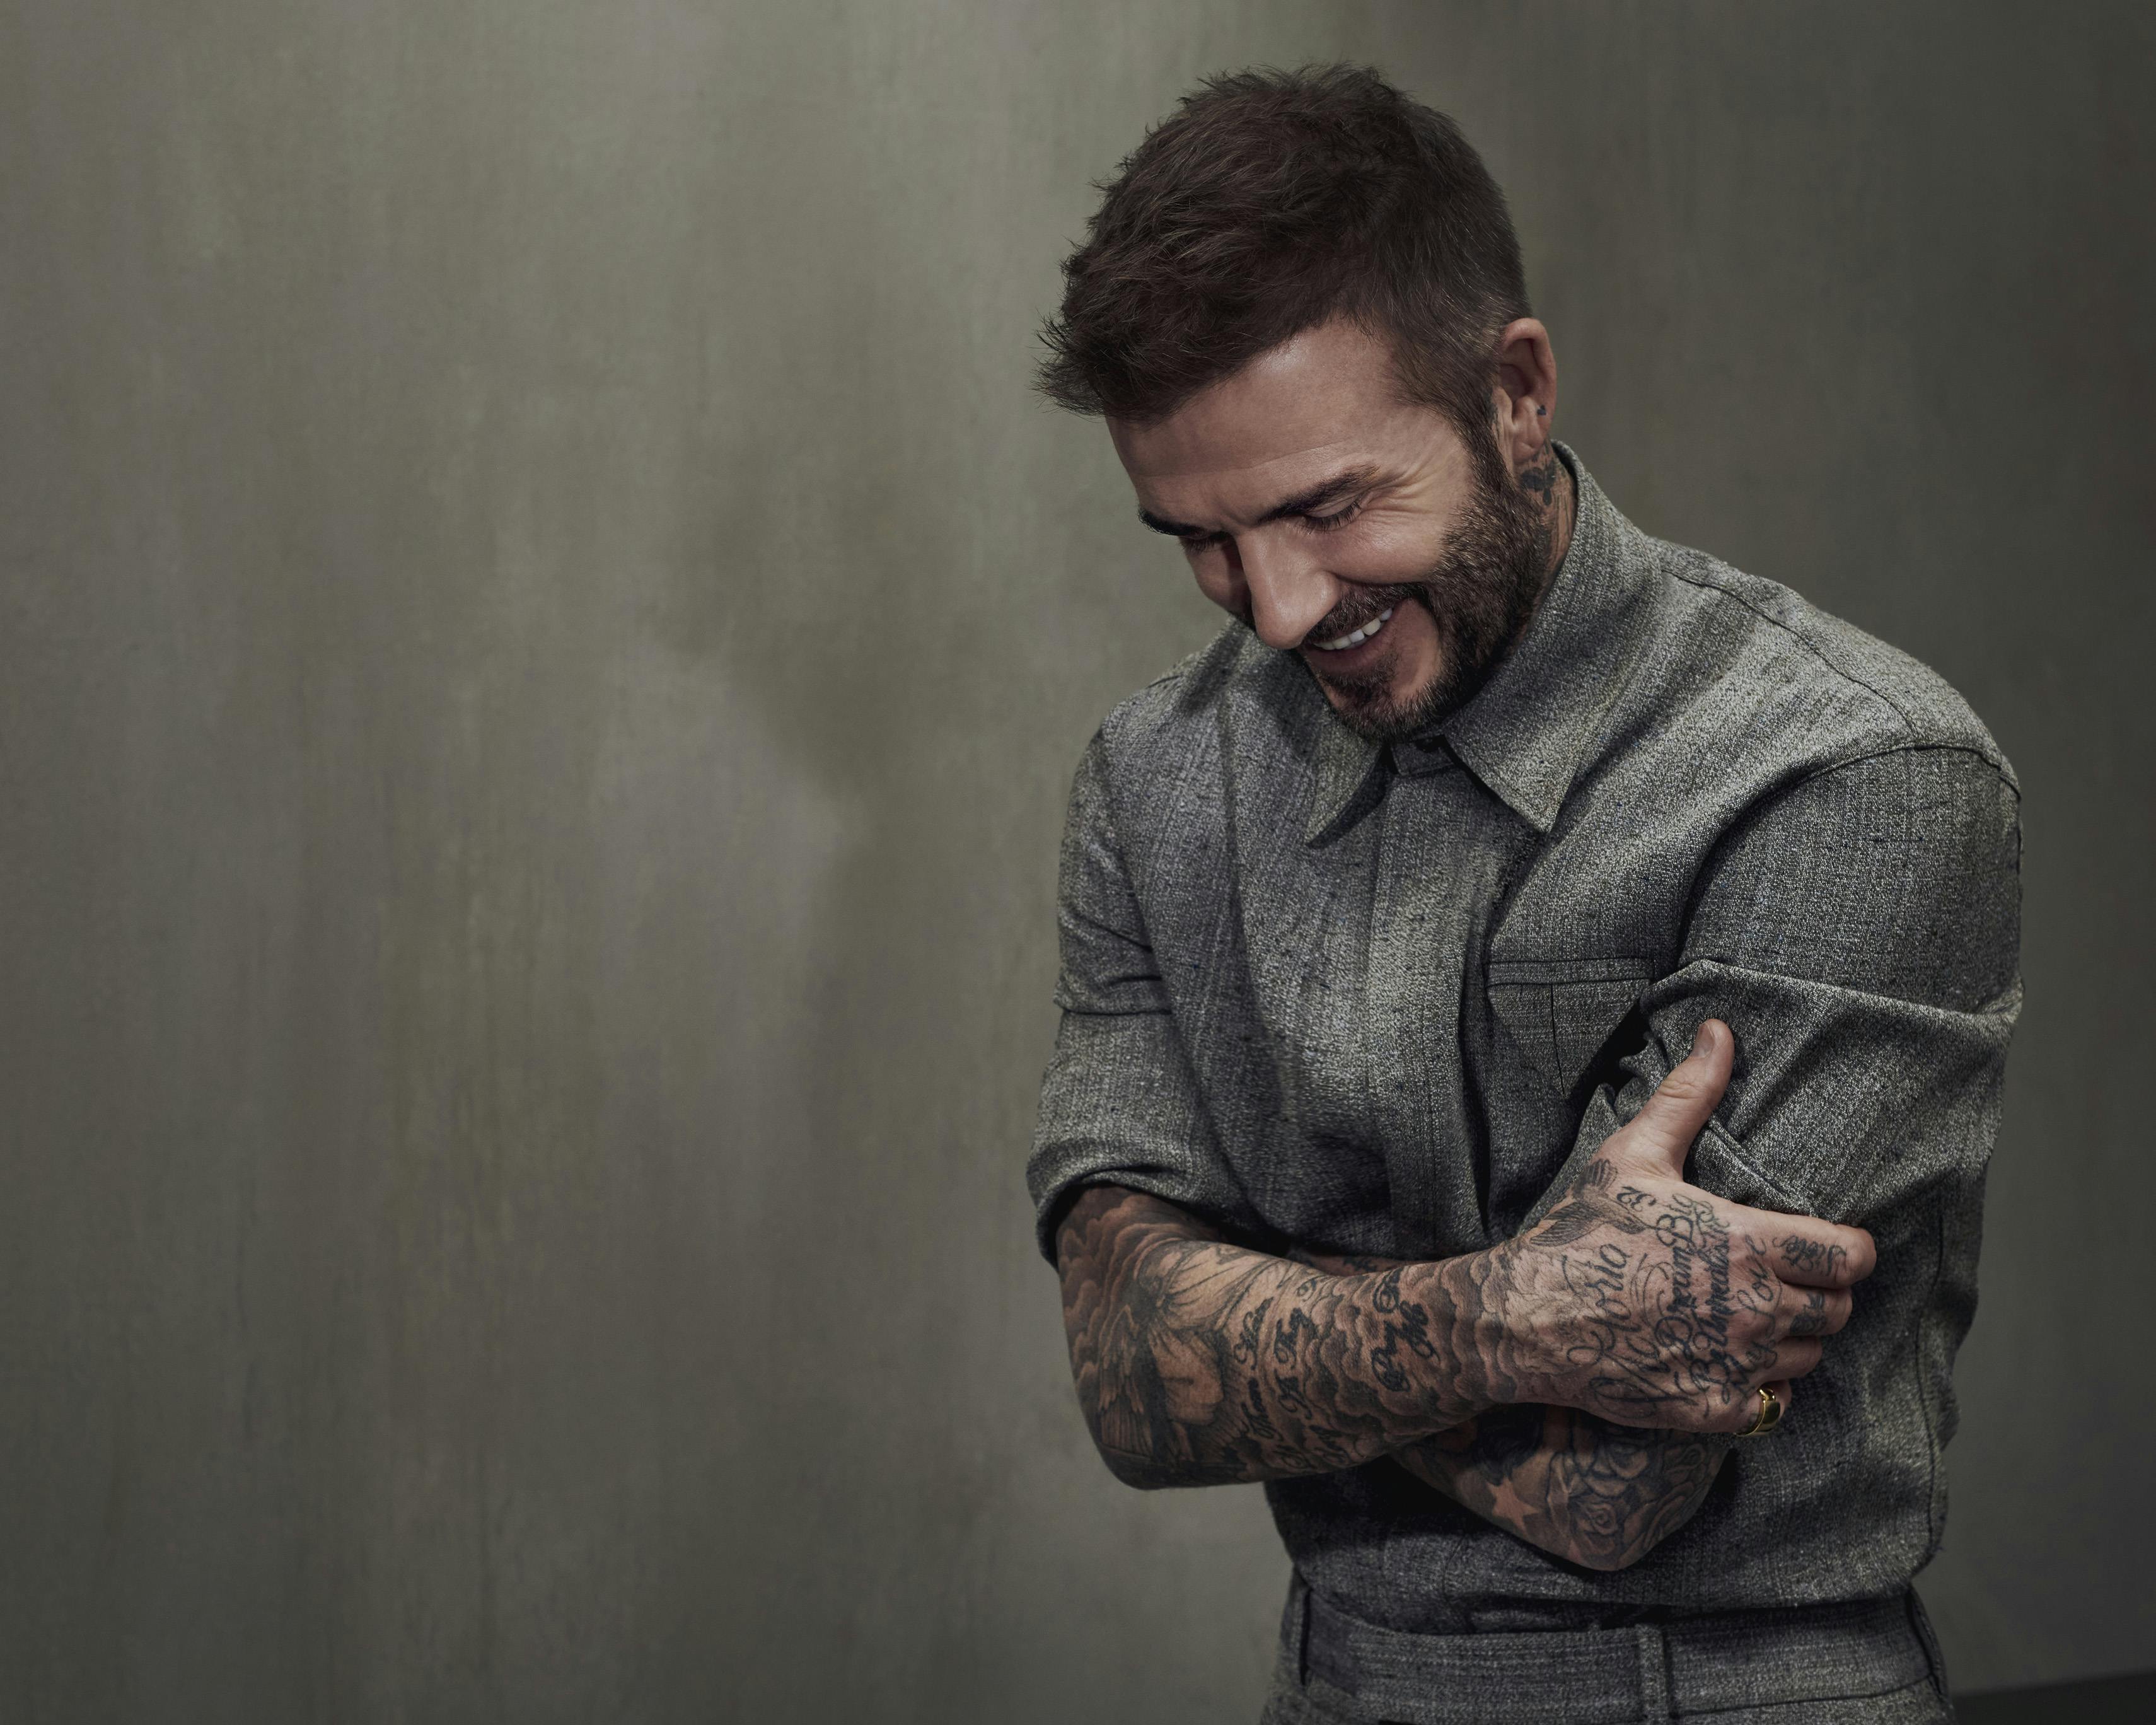 David Beckham wears a gray shirt and pants and shows off his tattoo sleeve against a gray wall. 